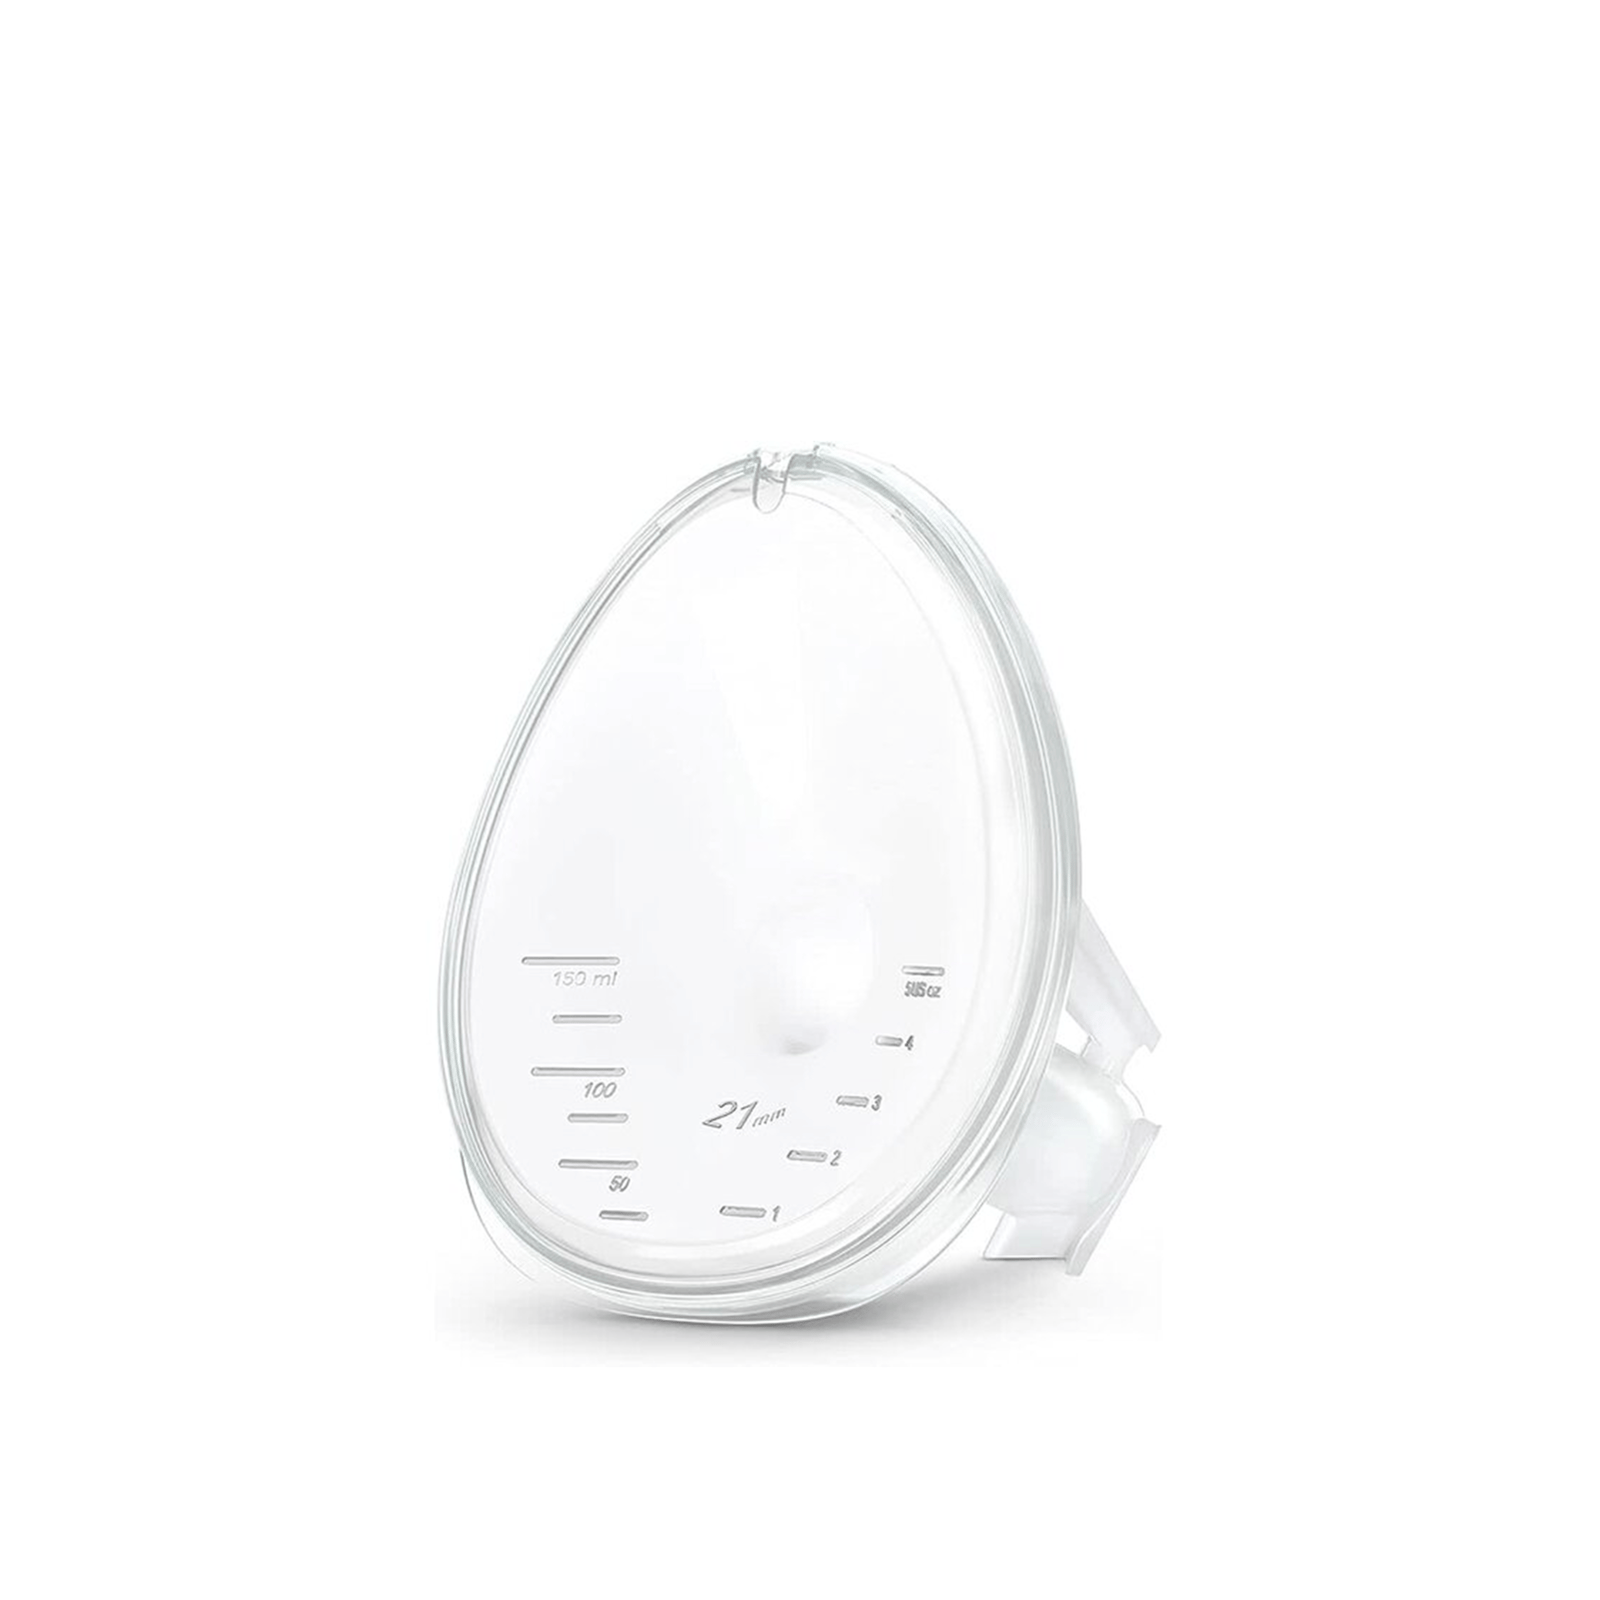 Medela Hands-Free Breast Shields Small Size x2